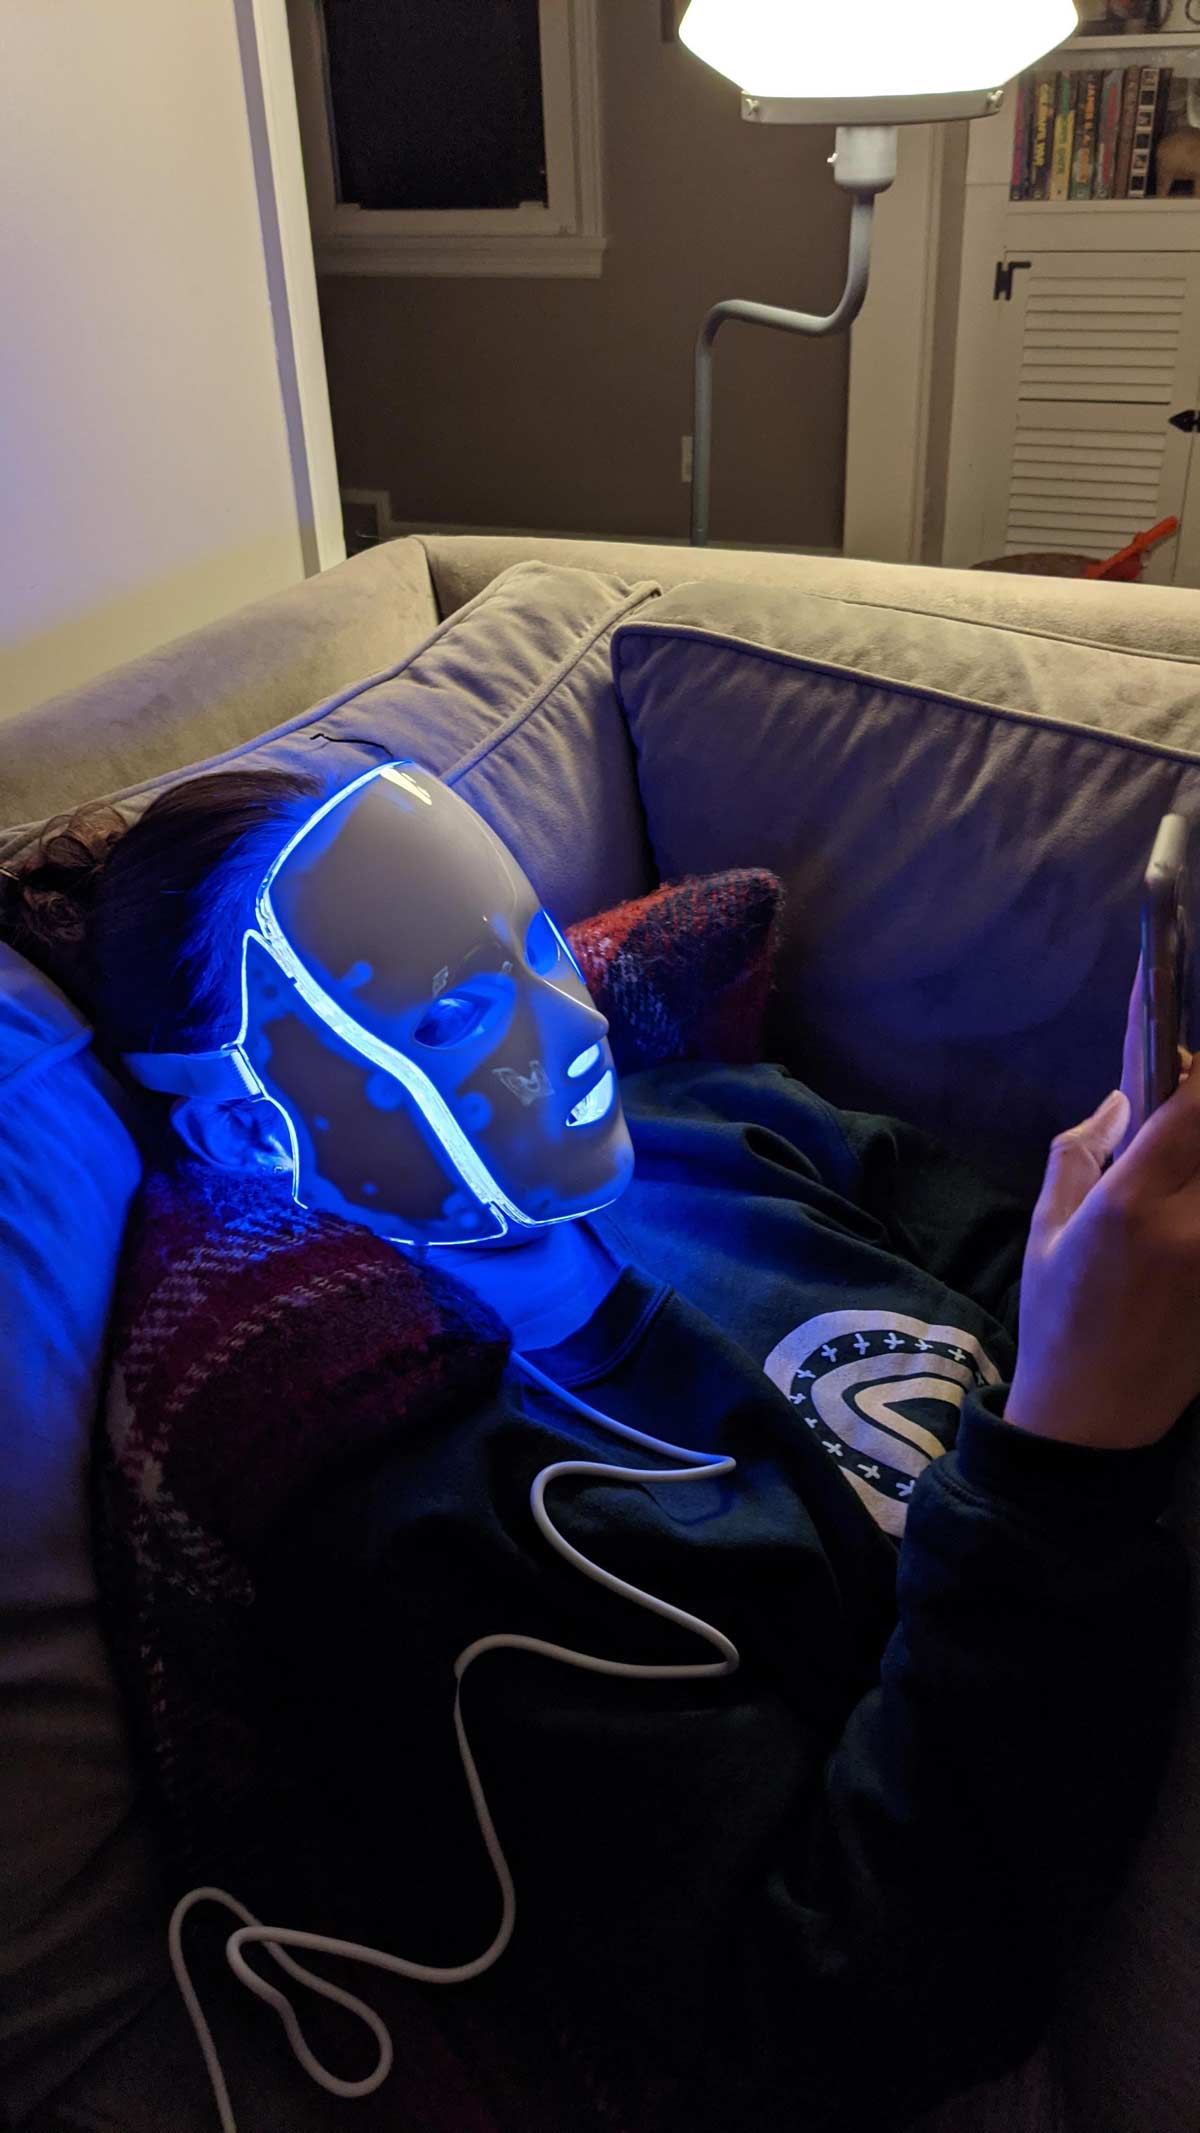 I think my wife is ready for Cyberpunk 2077